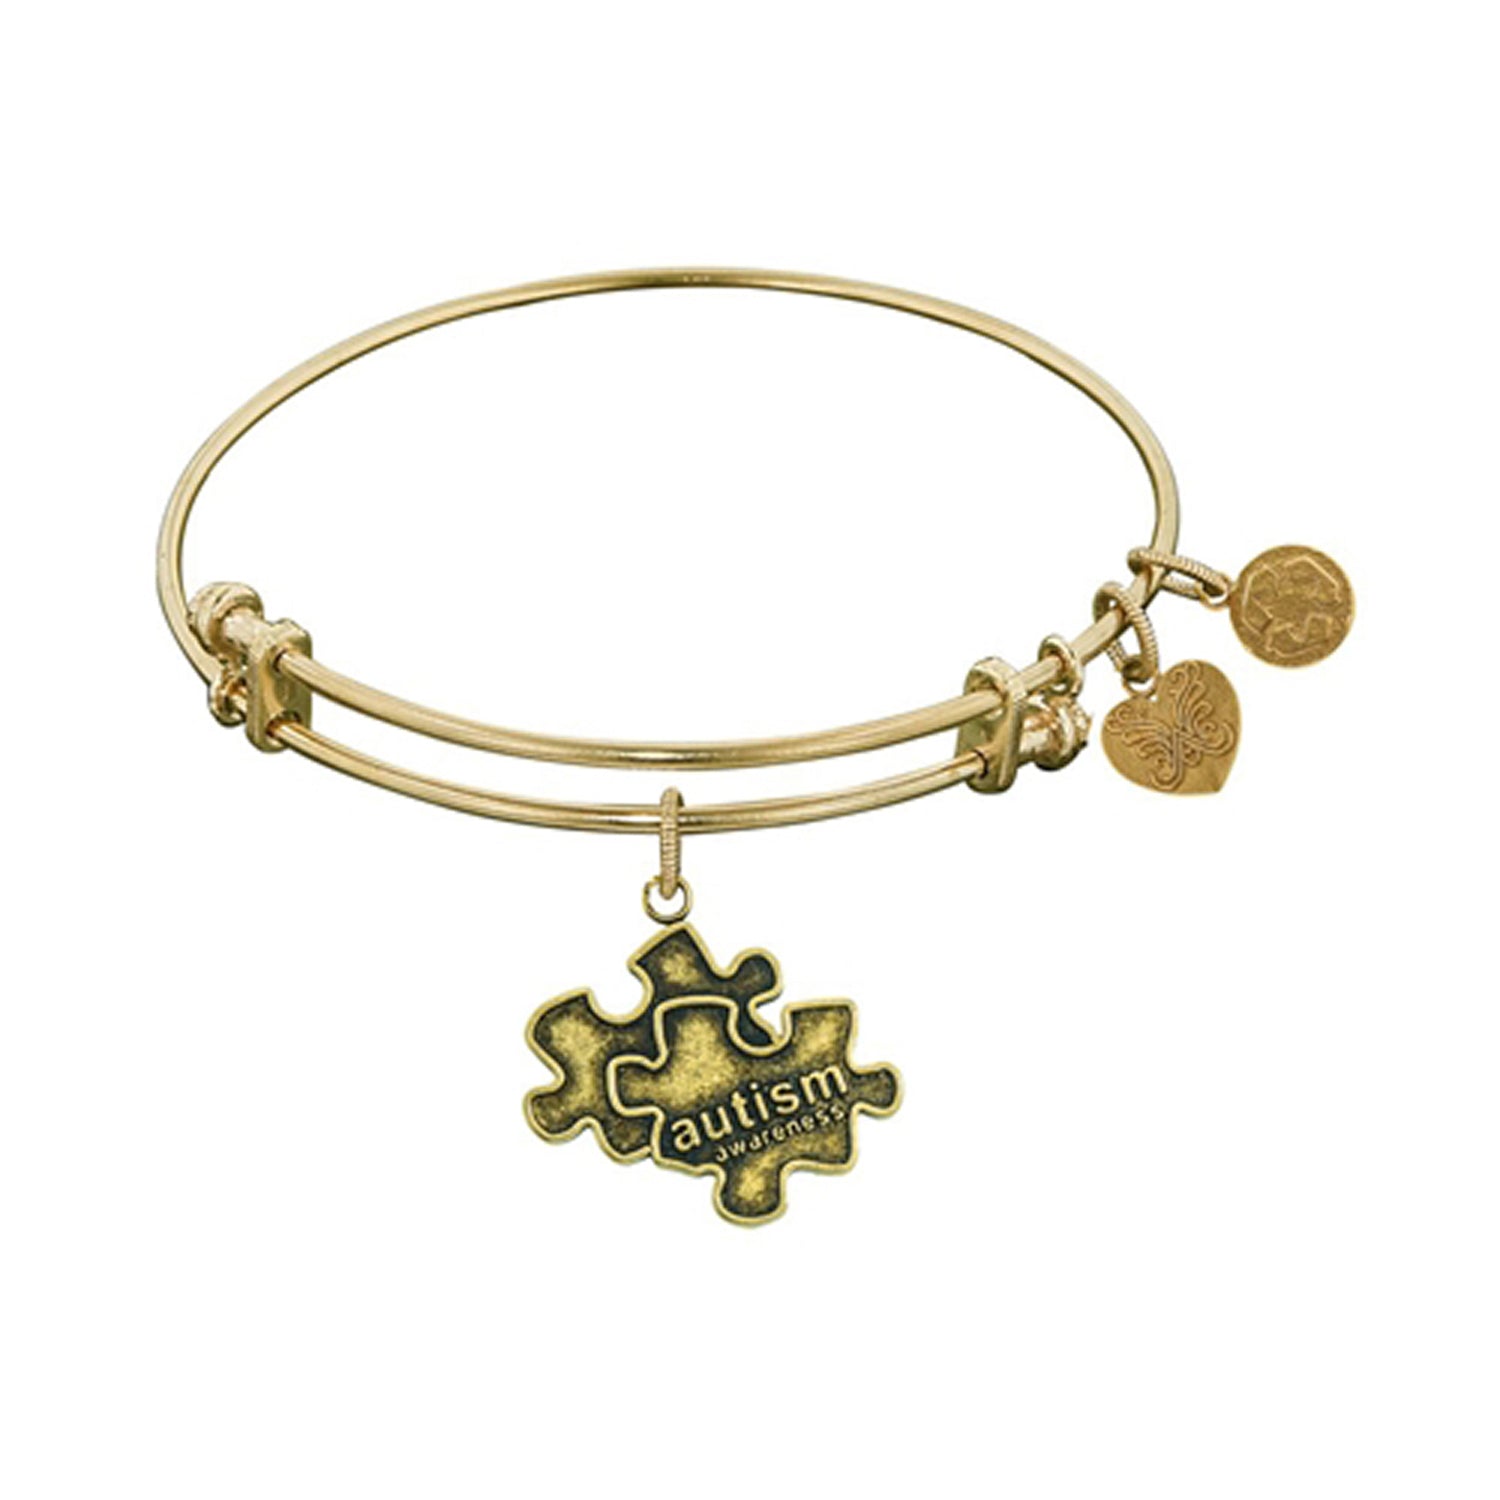 Smooth Finish Brass Generation Rescue Autism Angelica Bangle Bracelet, 7.25-inch